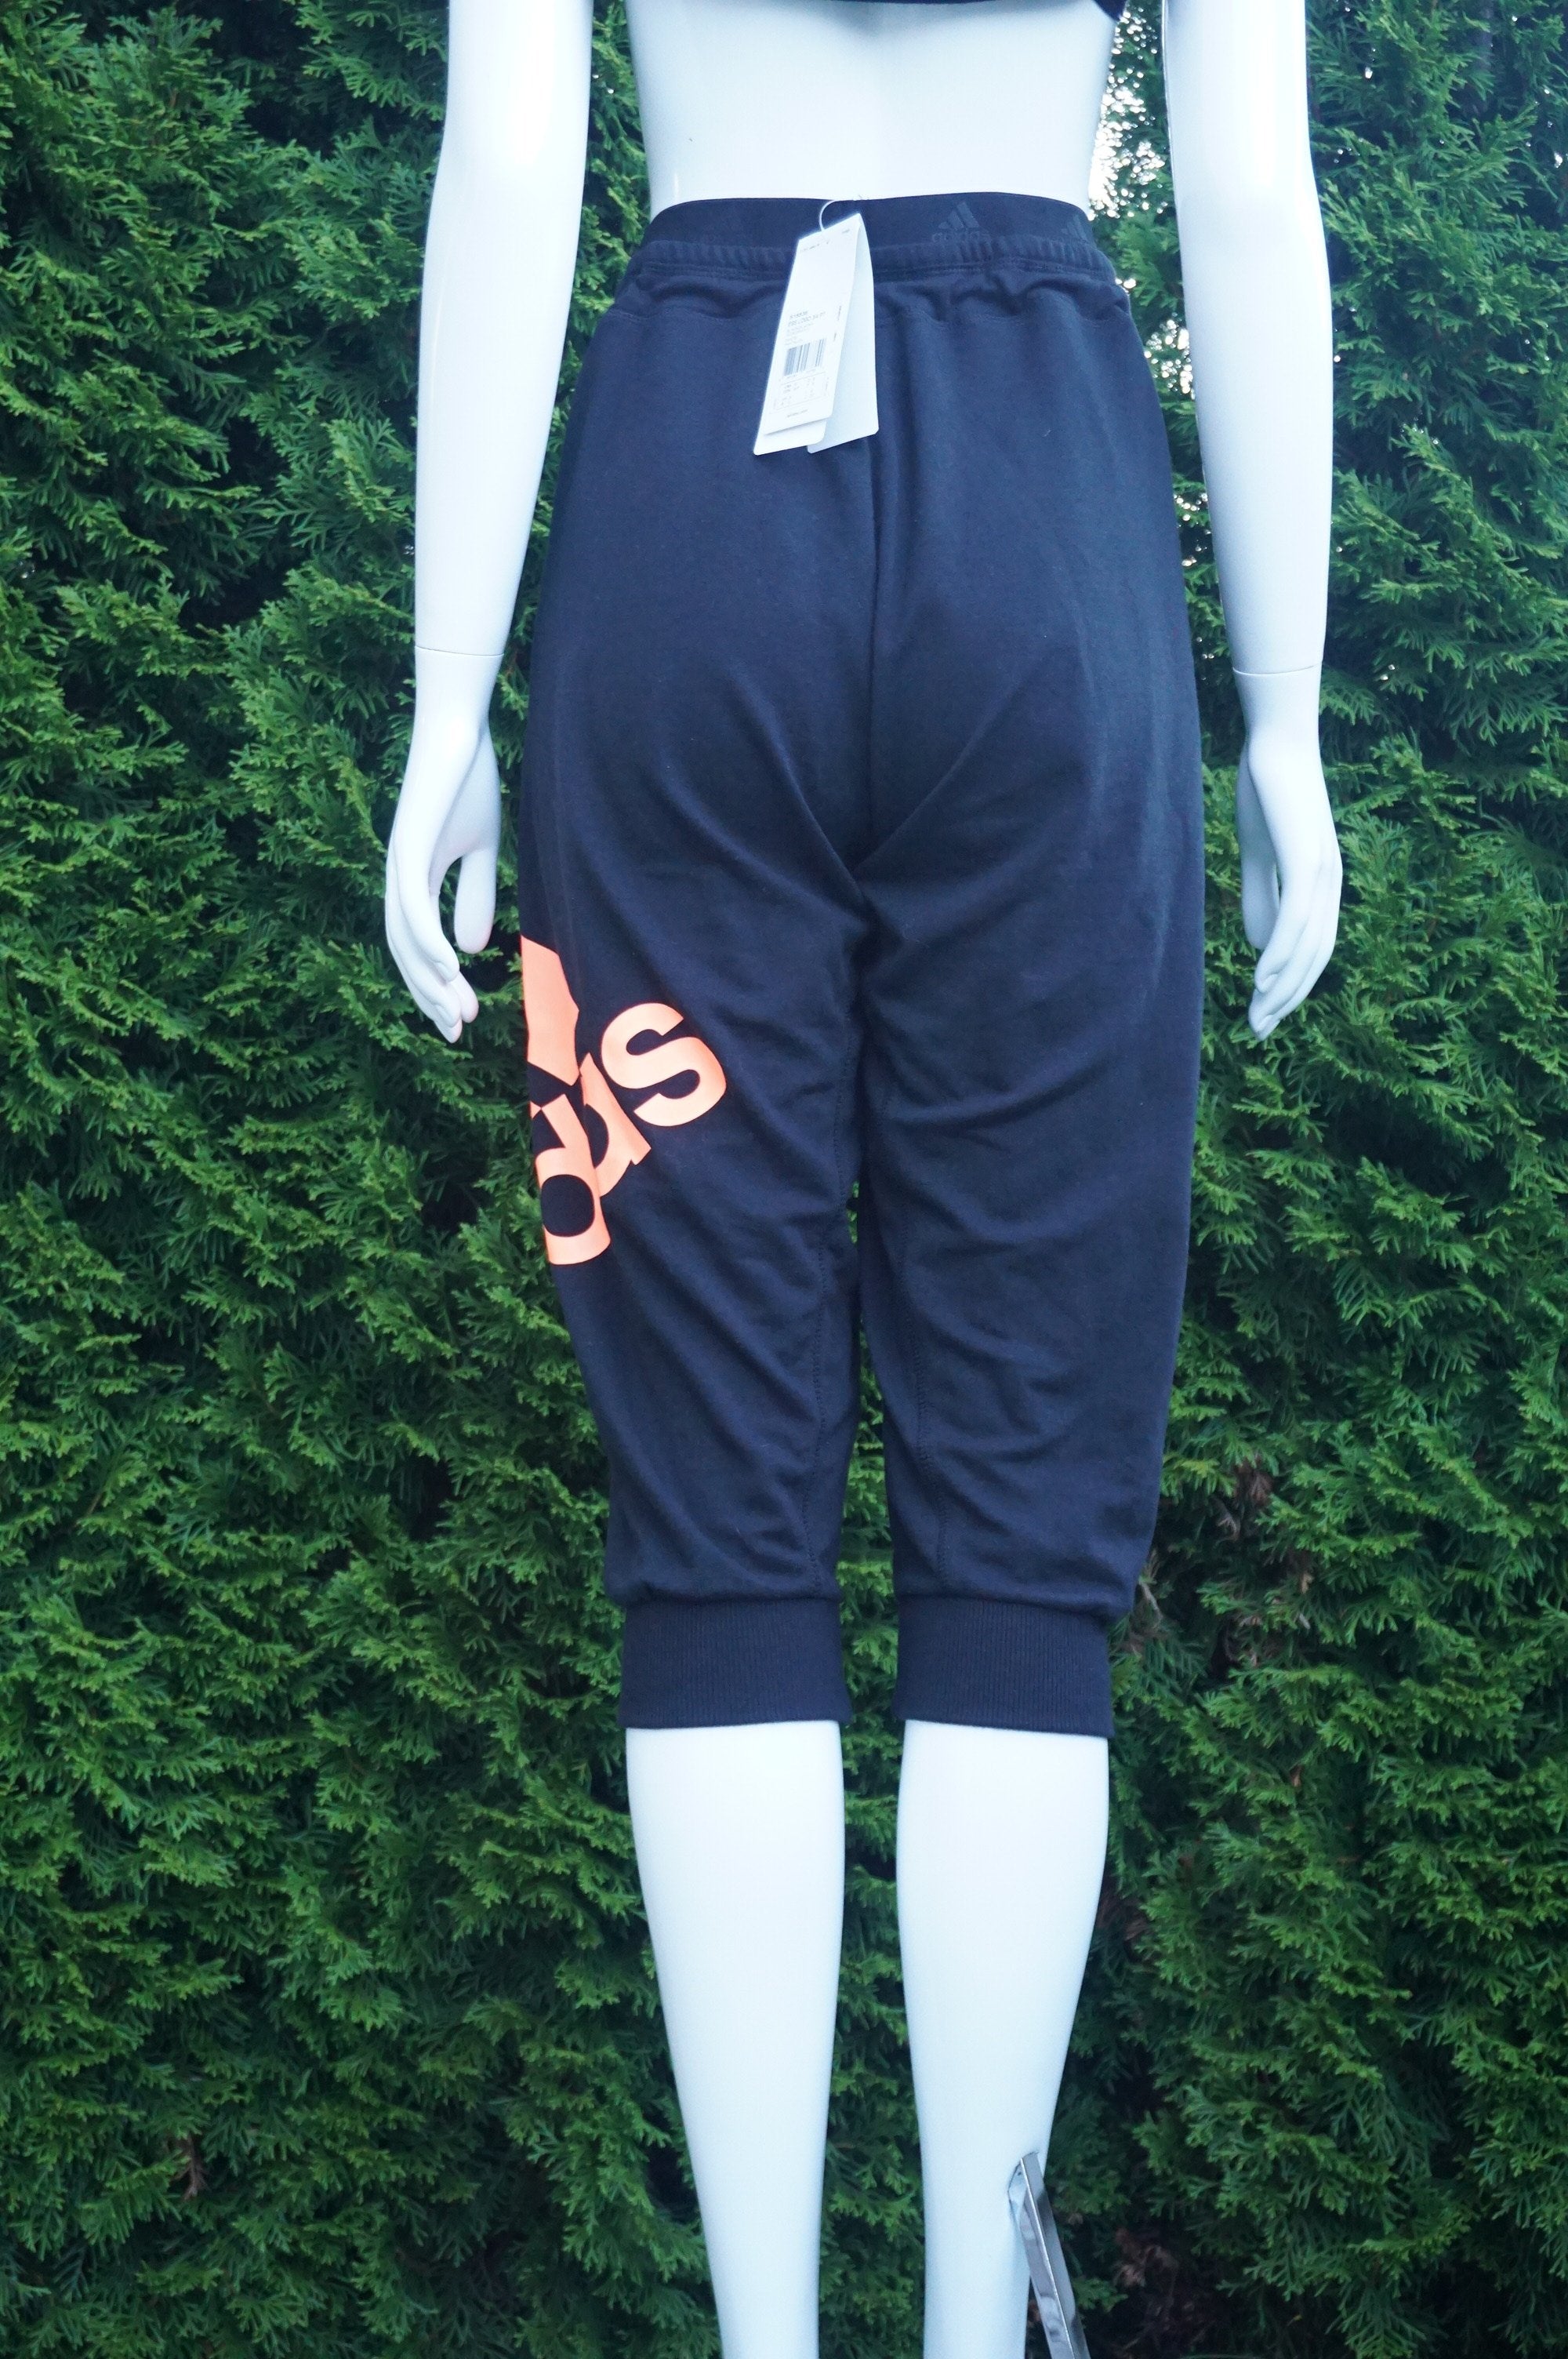 Adidas Comfy Sweatpants, New with tags sweatpants. Waist 31 inches when elastic is relaxed. Length 29.5 inches. Adjustable waist strap, Black, Orange, women's Pants, women's Black, Orange Pants, Adidas women's Pants, sweatpants. Comfy pants, stay at home pants